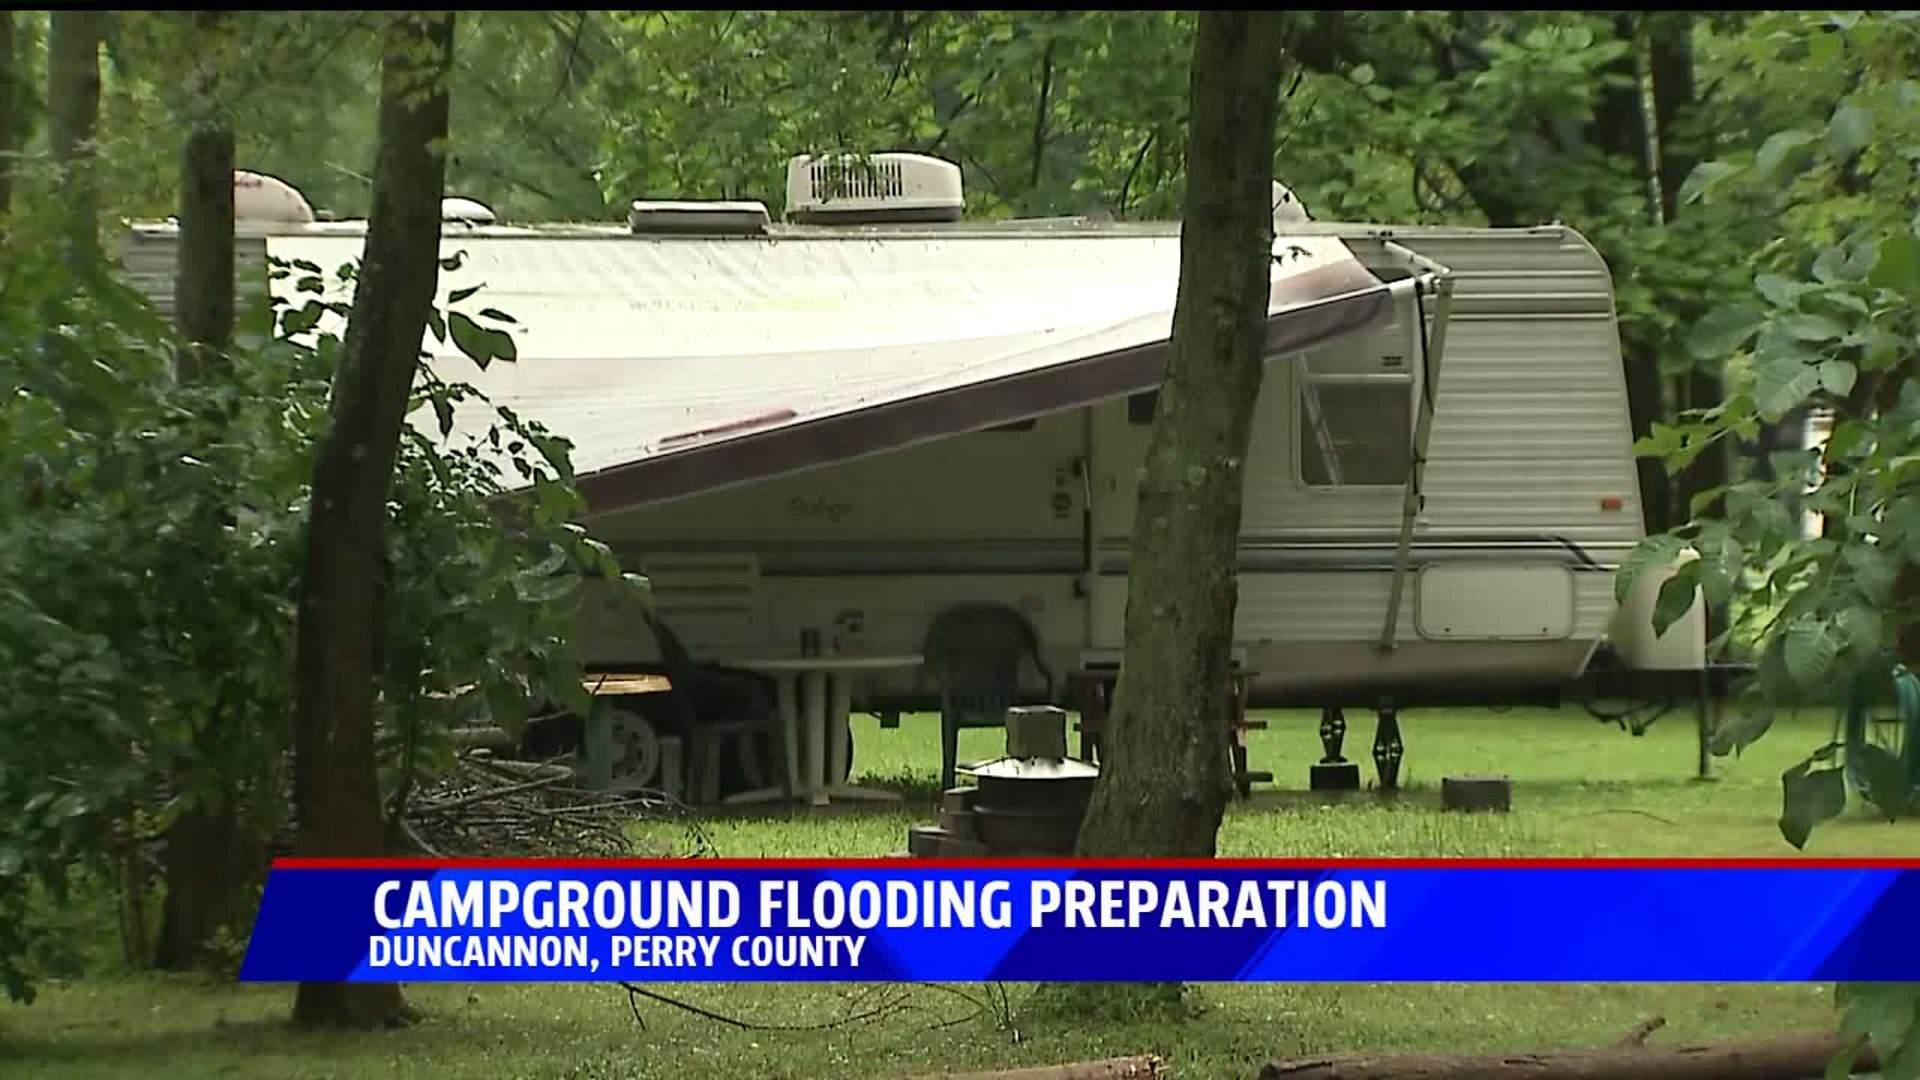 Campground flooding preparation in Perry County